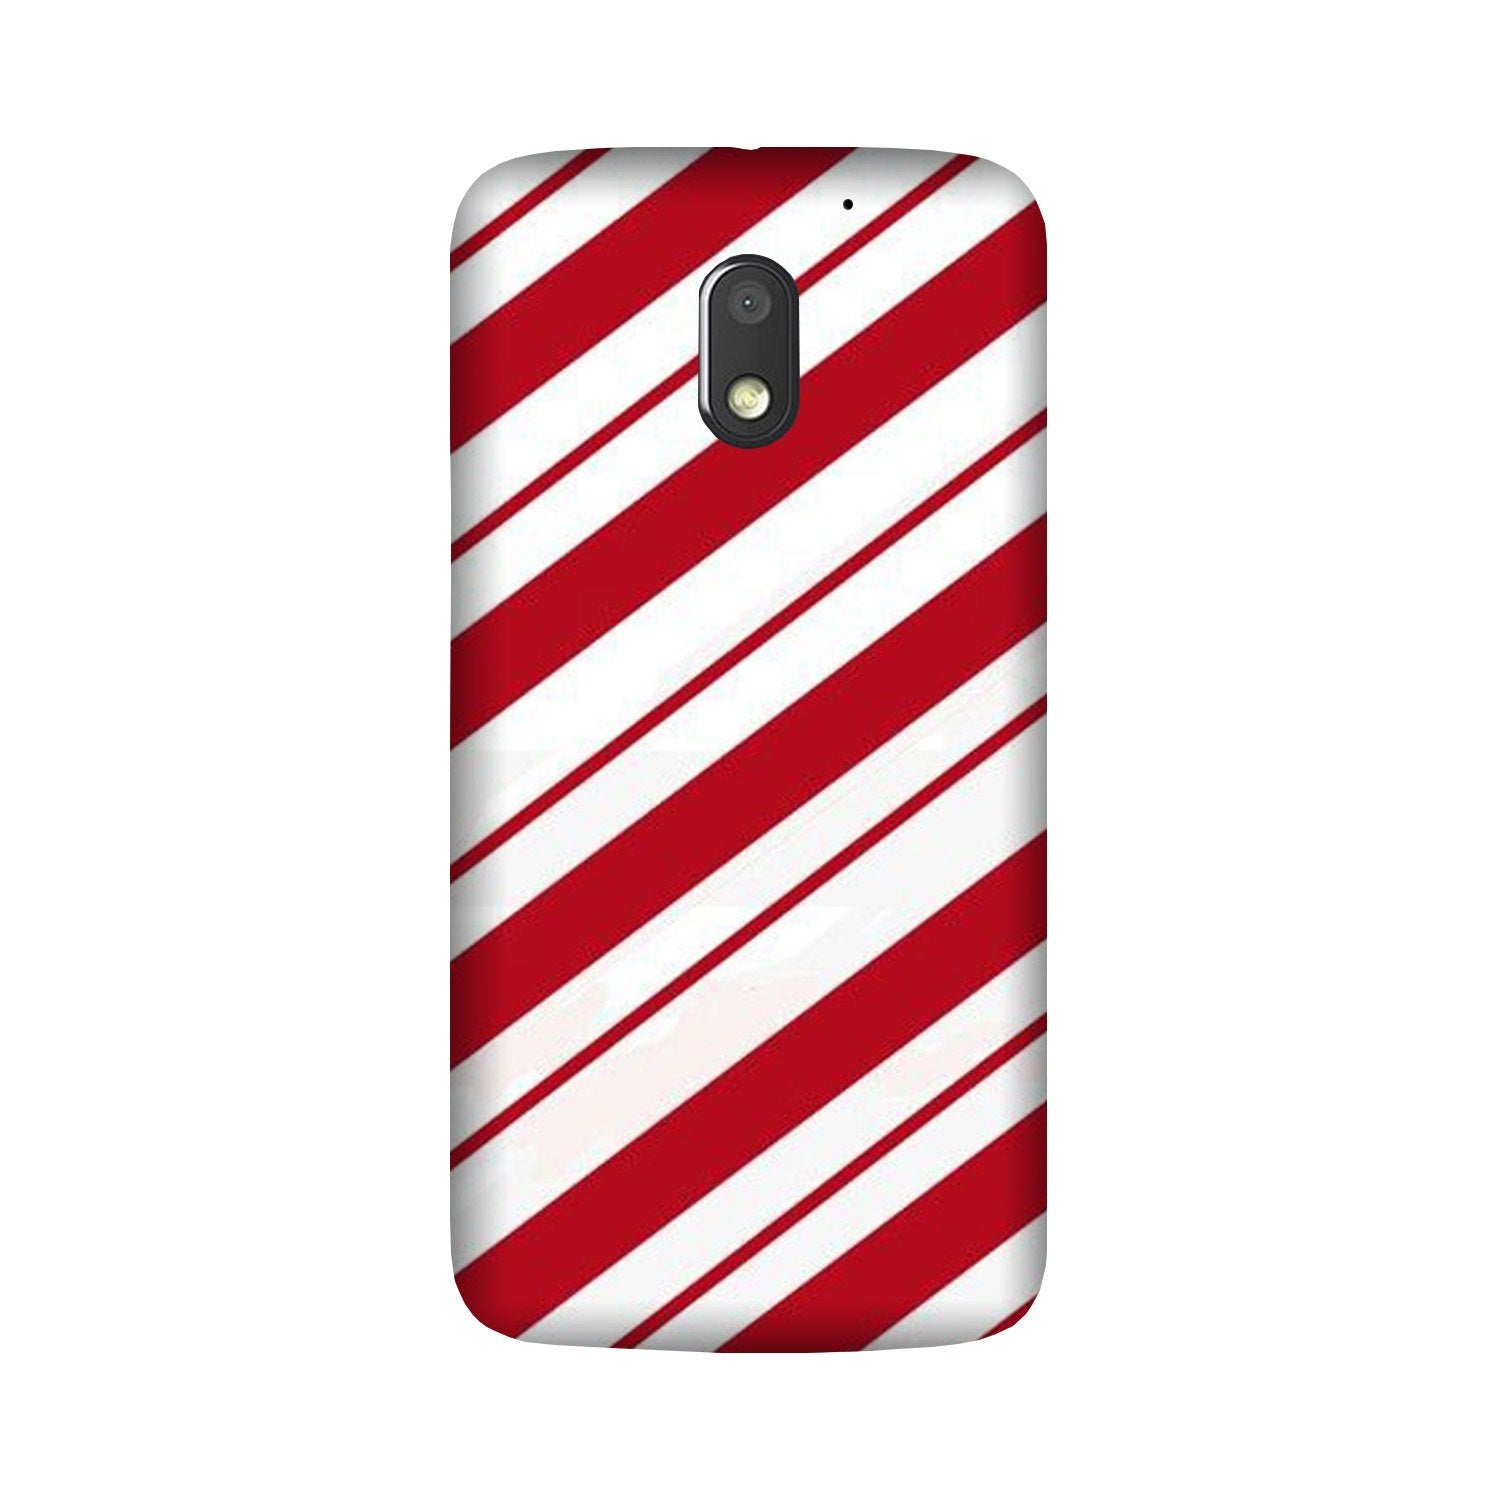 Red White Case for Moto G4 Play